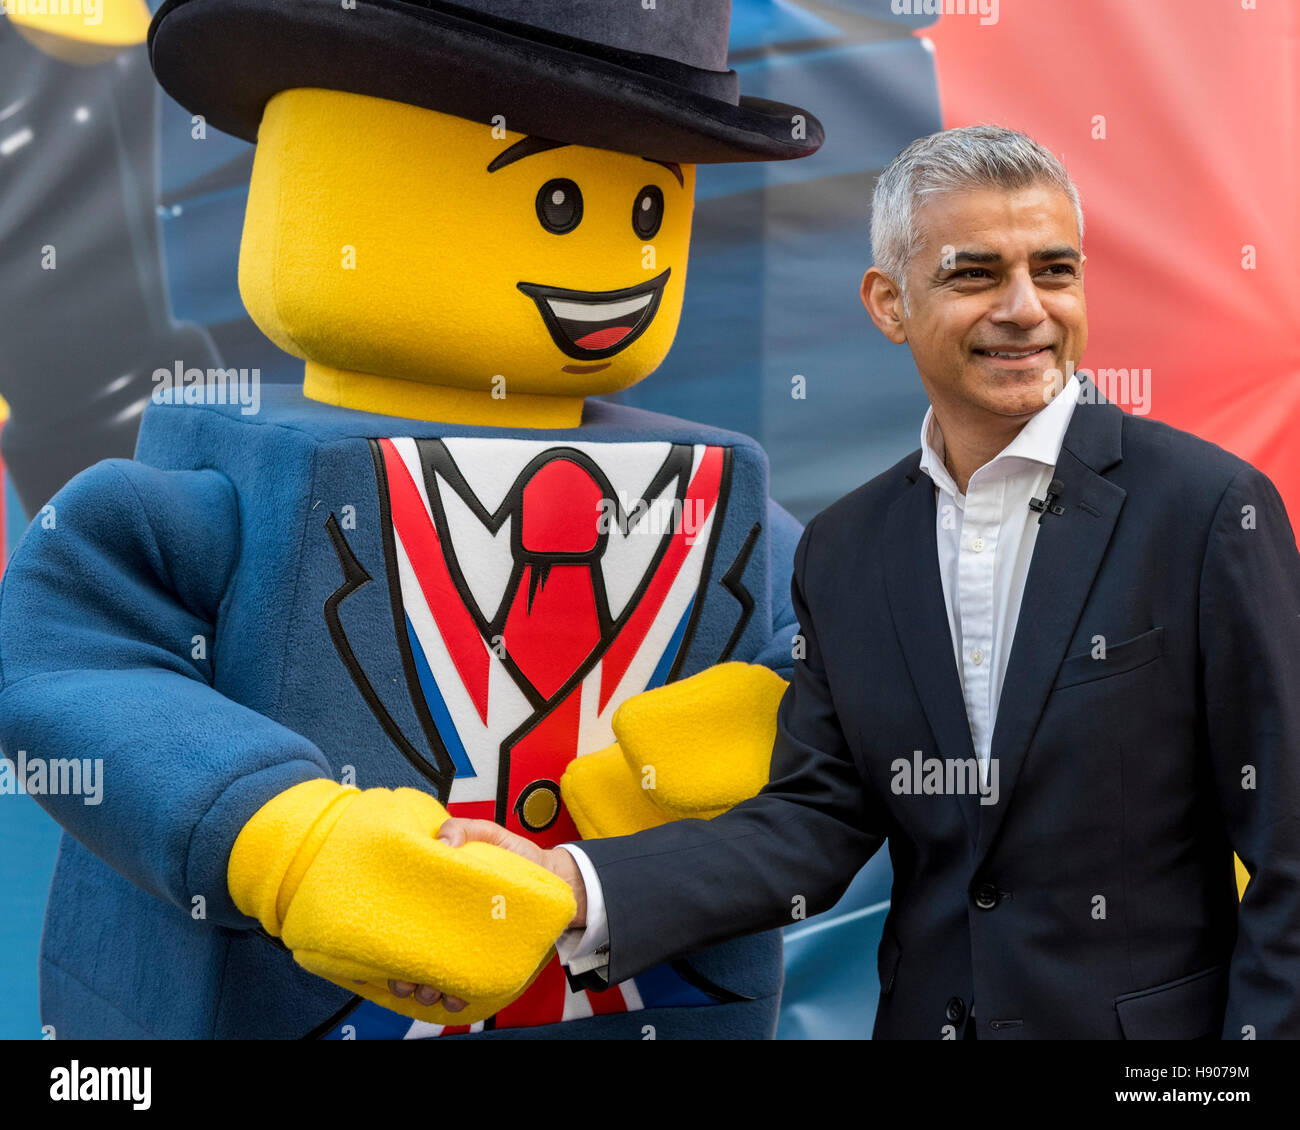 London, UK 17 November 2016. (L to R) Lego mascot, "Lester", and Sadiq  Khan. The world's largest Lego store is opened by Sadiq Khan, Mayor of  London, in Leicester Square. Huge crowds